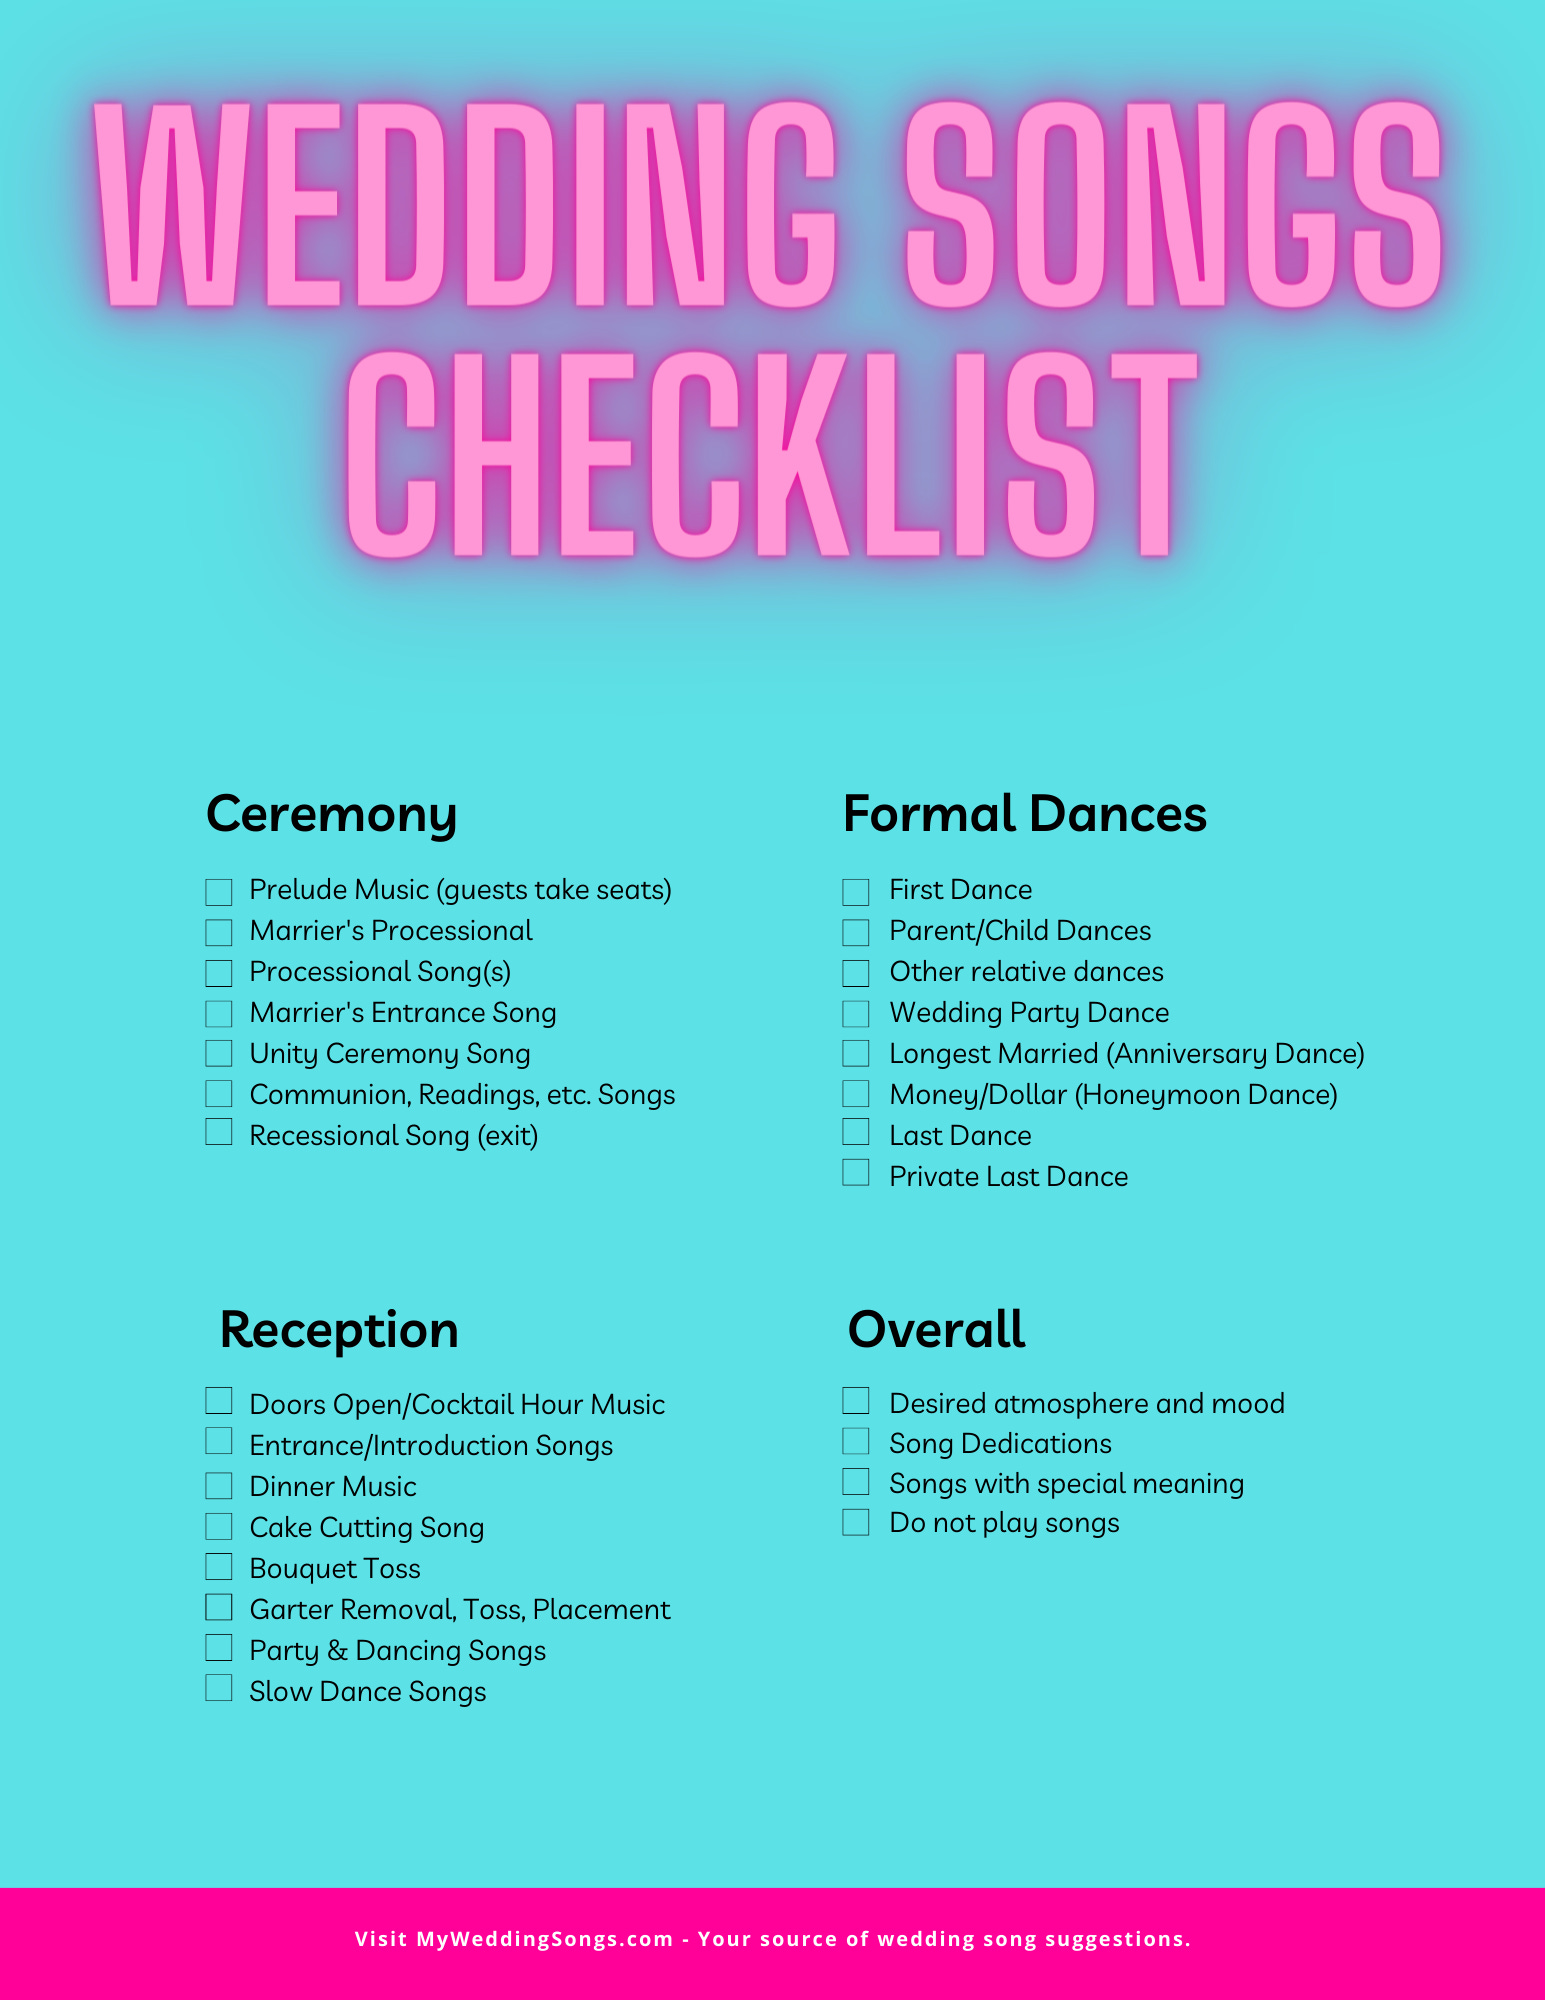 Wedding Garter Removal Songs by Y-it Entertainment